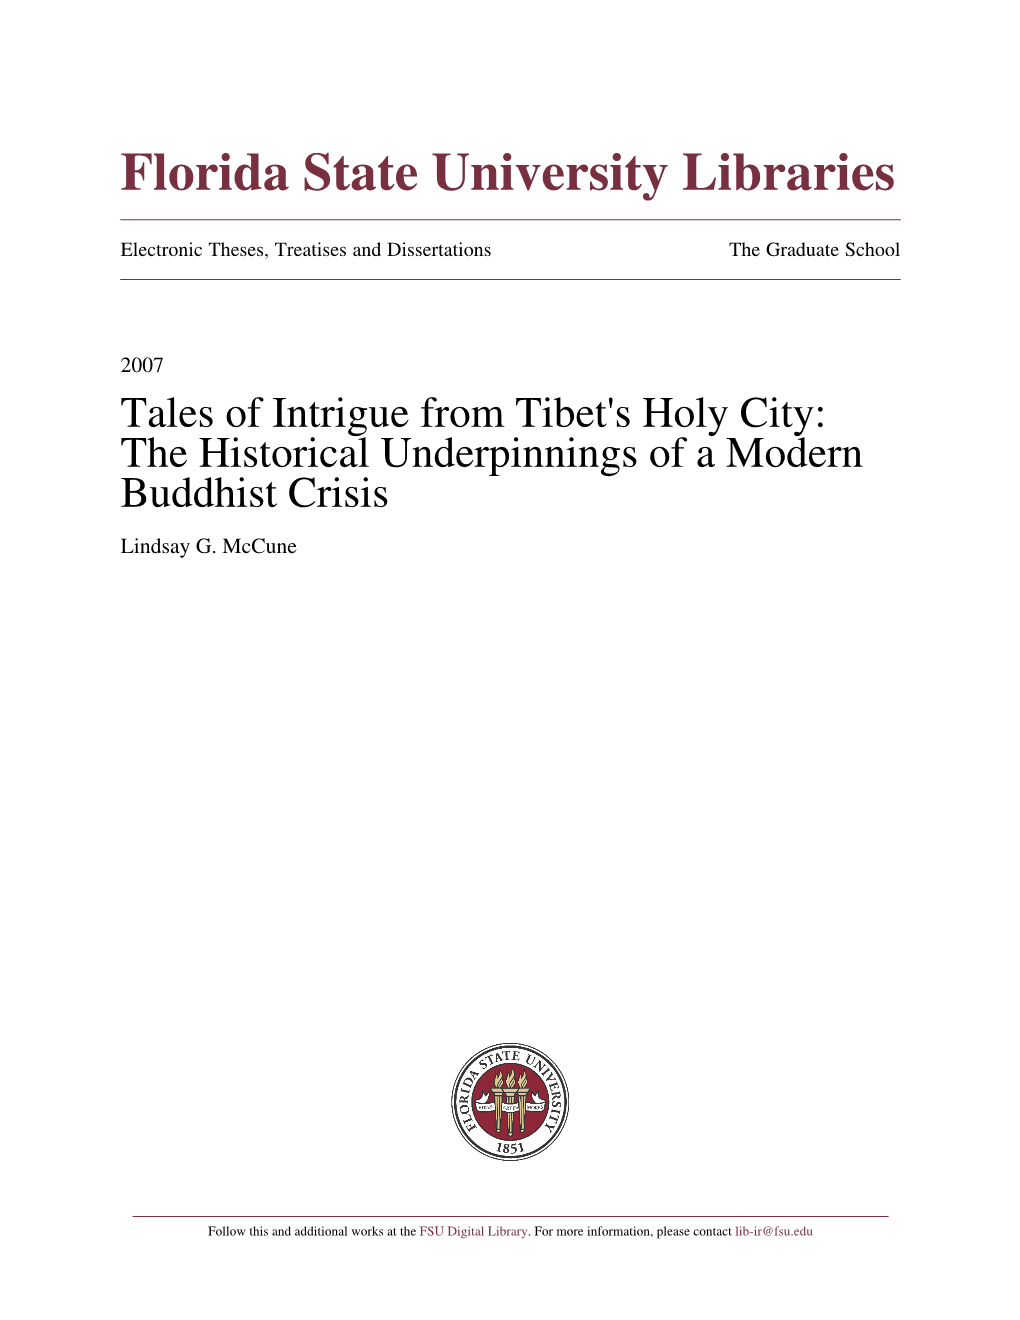 Tales of Intrigue from Tibet's Holy City: the Historical Underpinnings of a Modern Buddhist Crisis Lindsay G